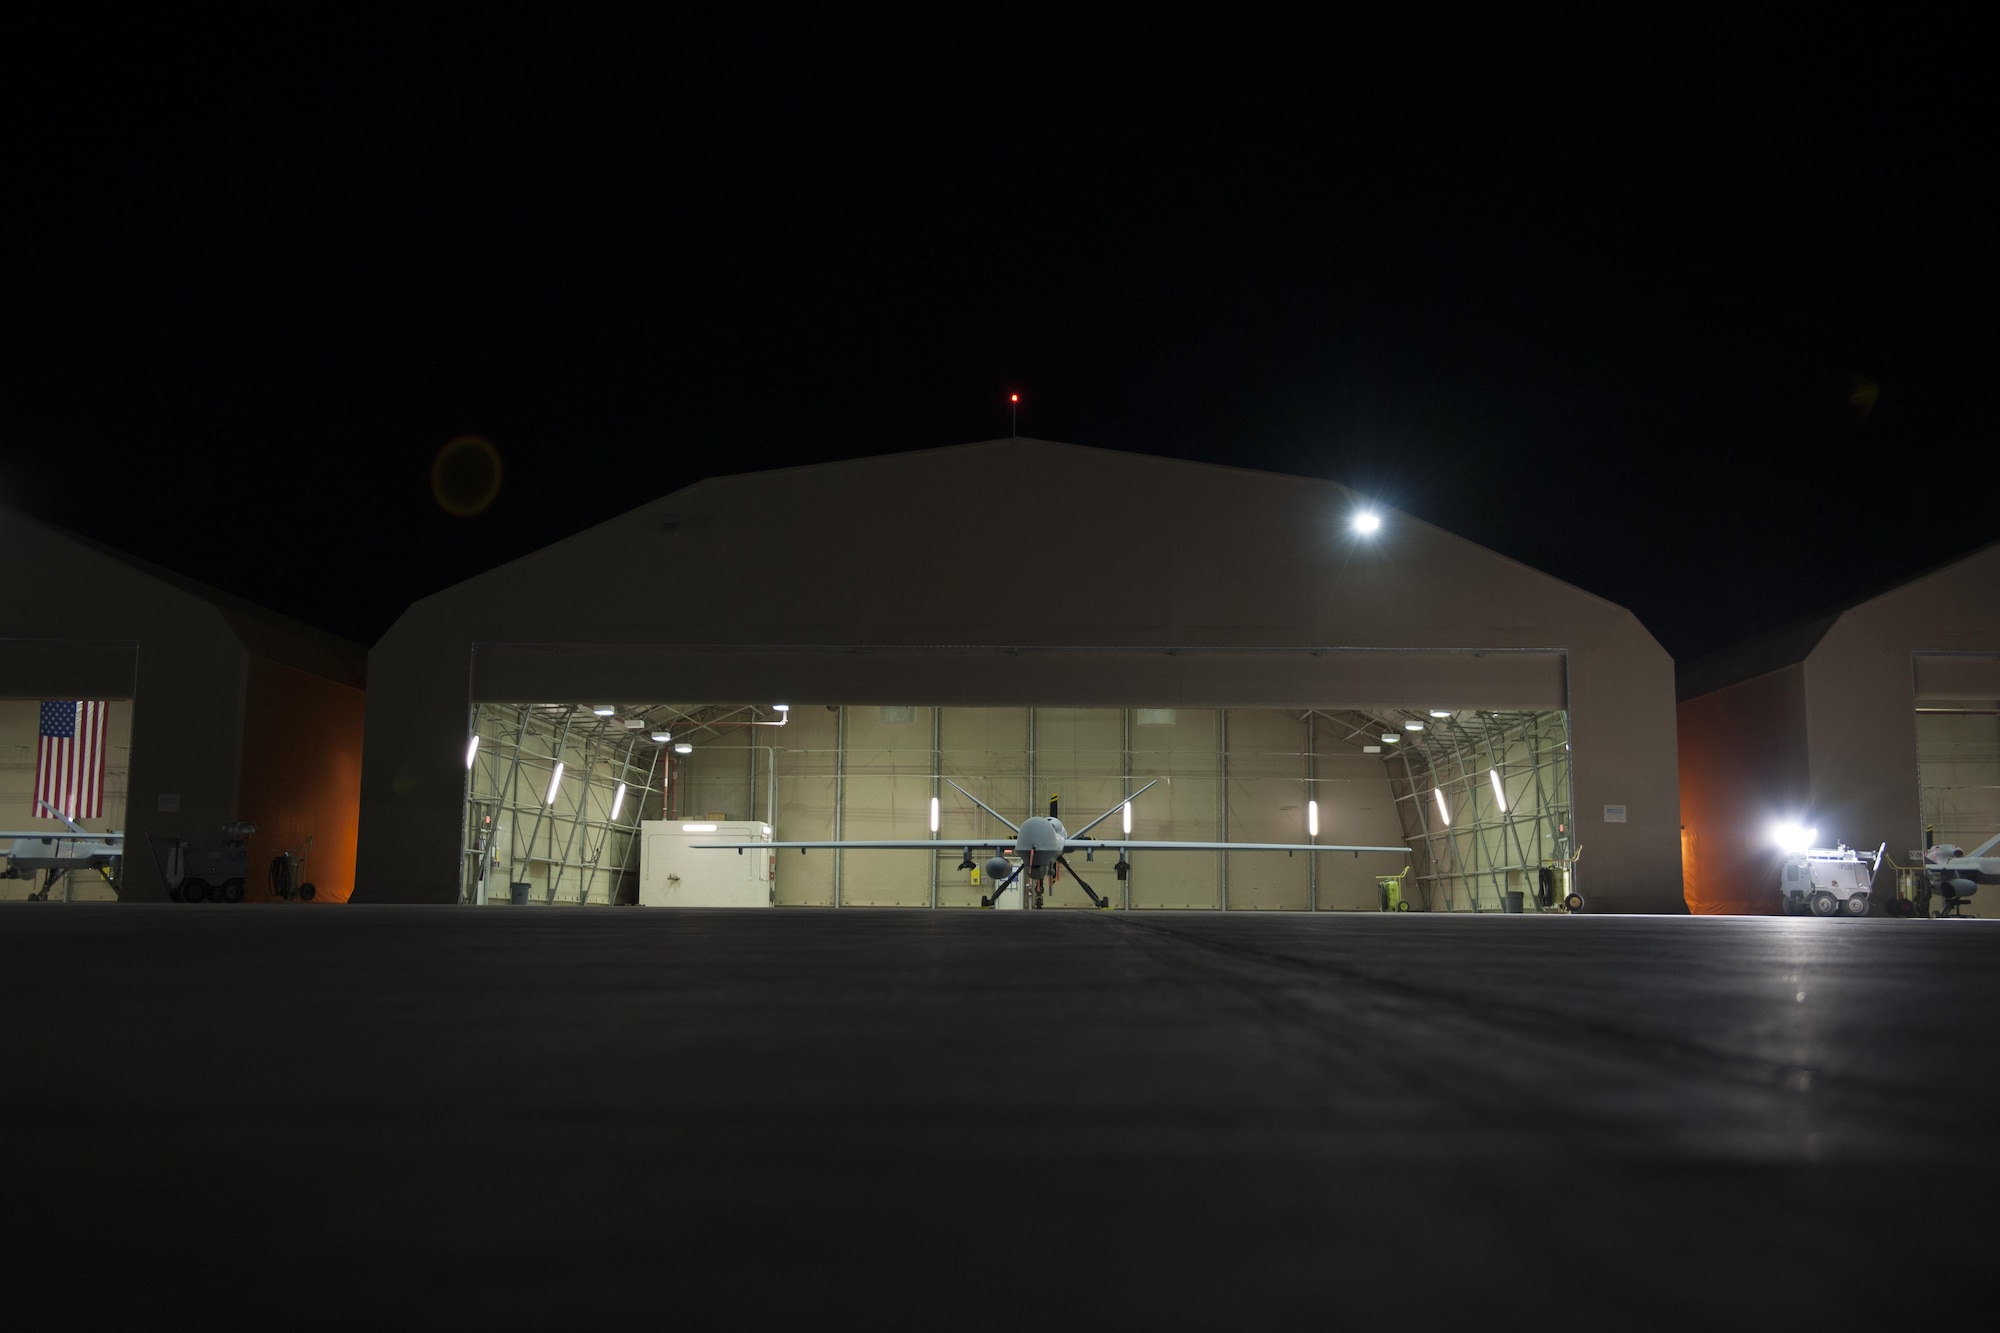 An MQ-9 Reaper equipped with an extended range modification from the 62nd Expeditionary Reconnaissance Squadron sits in a hanger at Kandahar Airfield, Afghanistan, Dec. 6, 2015. The ER modification allows for 20 to 40 percent additional flight time dependent on the aircraft's loadout. (U.S. Air Force photo by Tech. Sgt. Robert Cloys/Released)